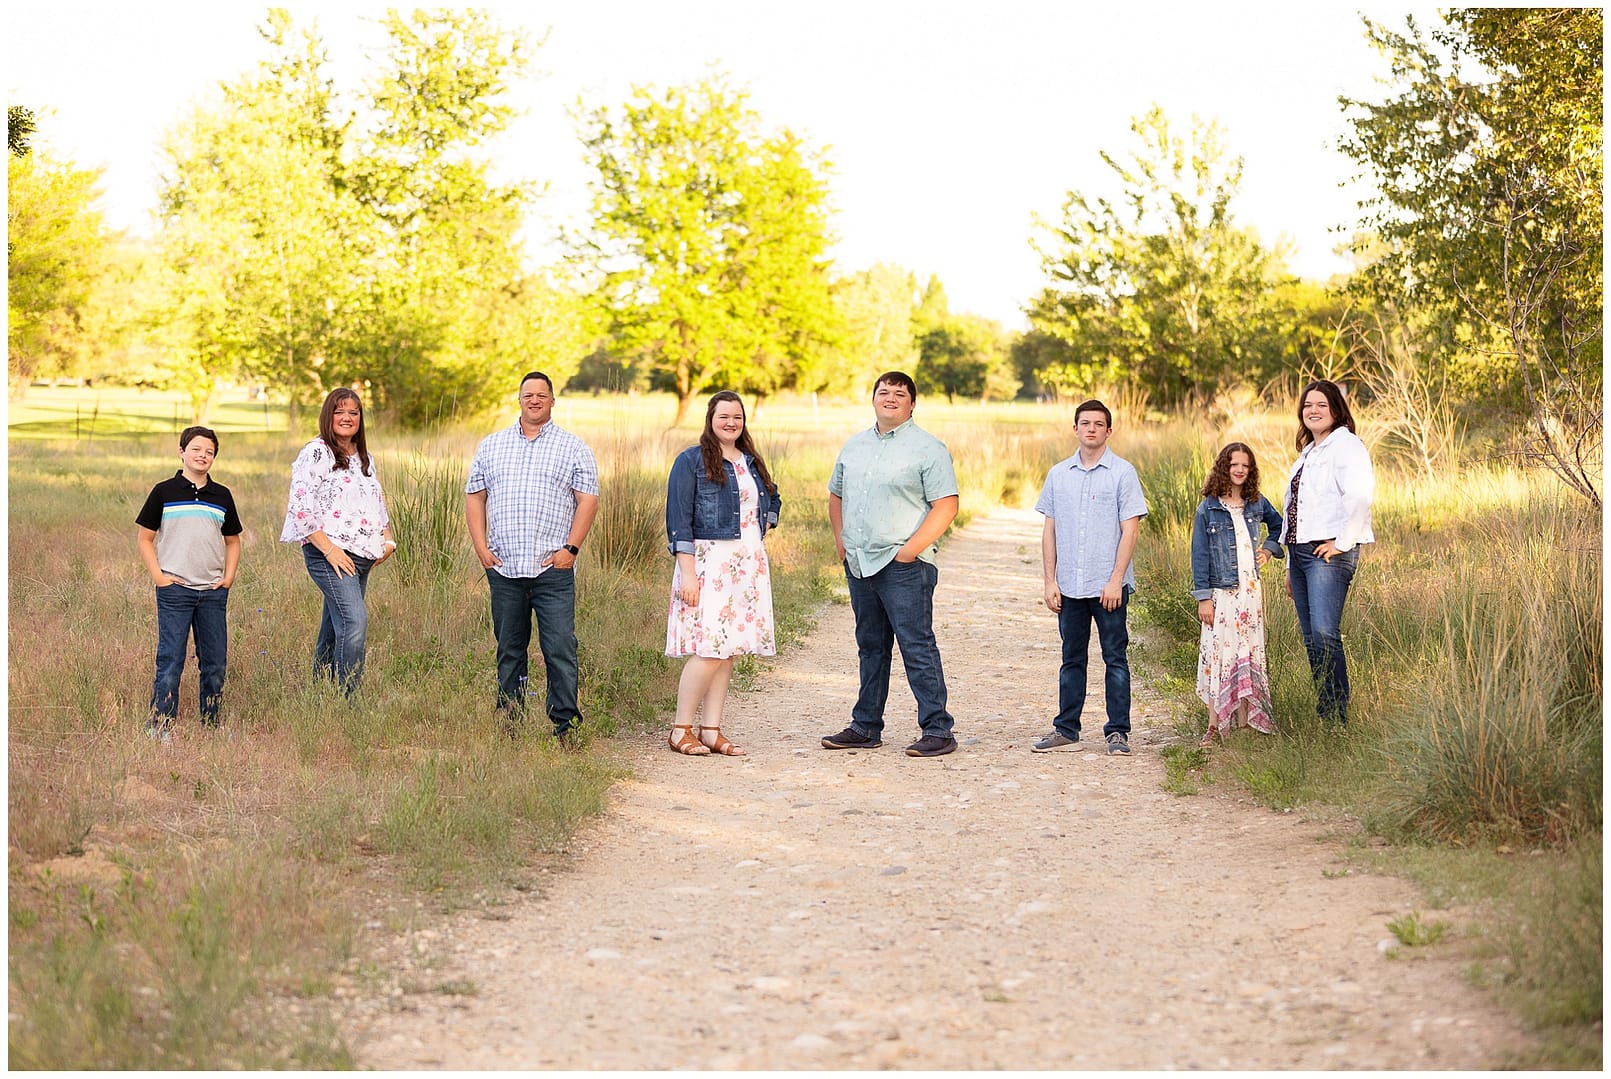 Large family stands apart while posing for photo. Photo by Tiffany Hix Photography.